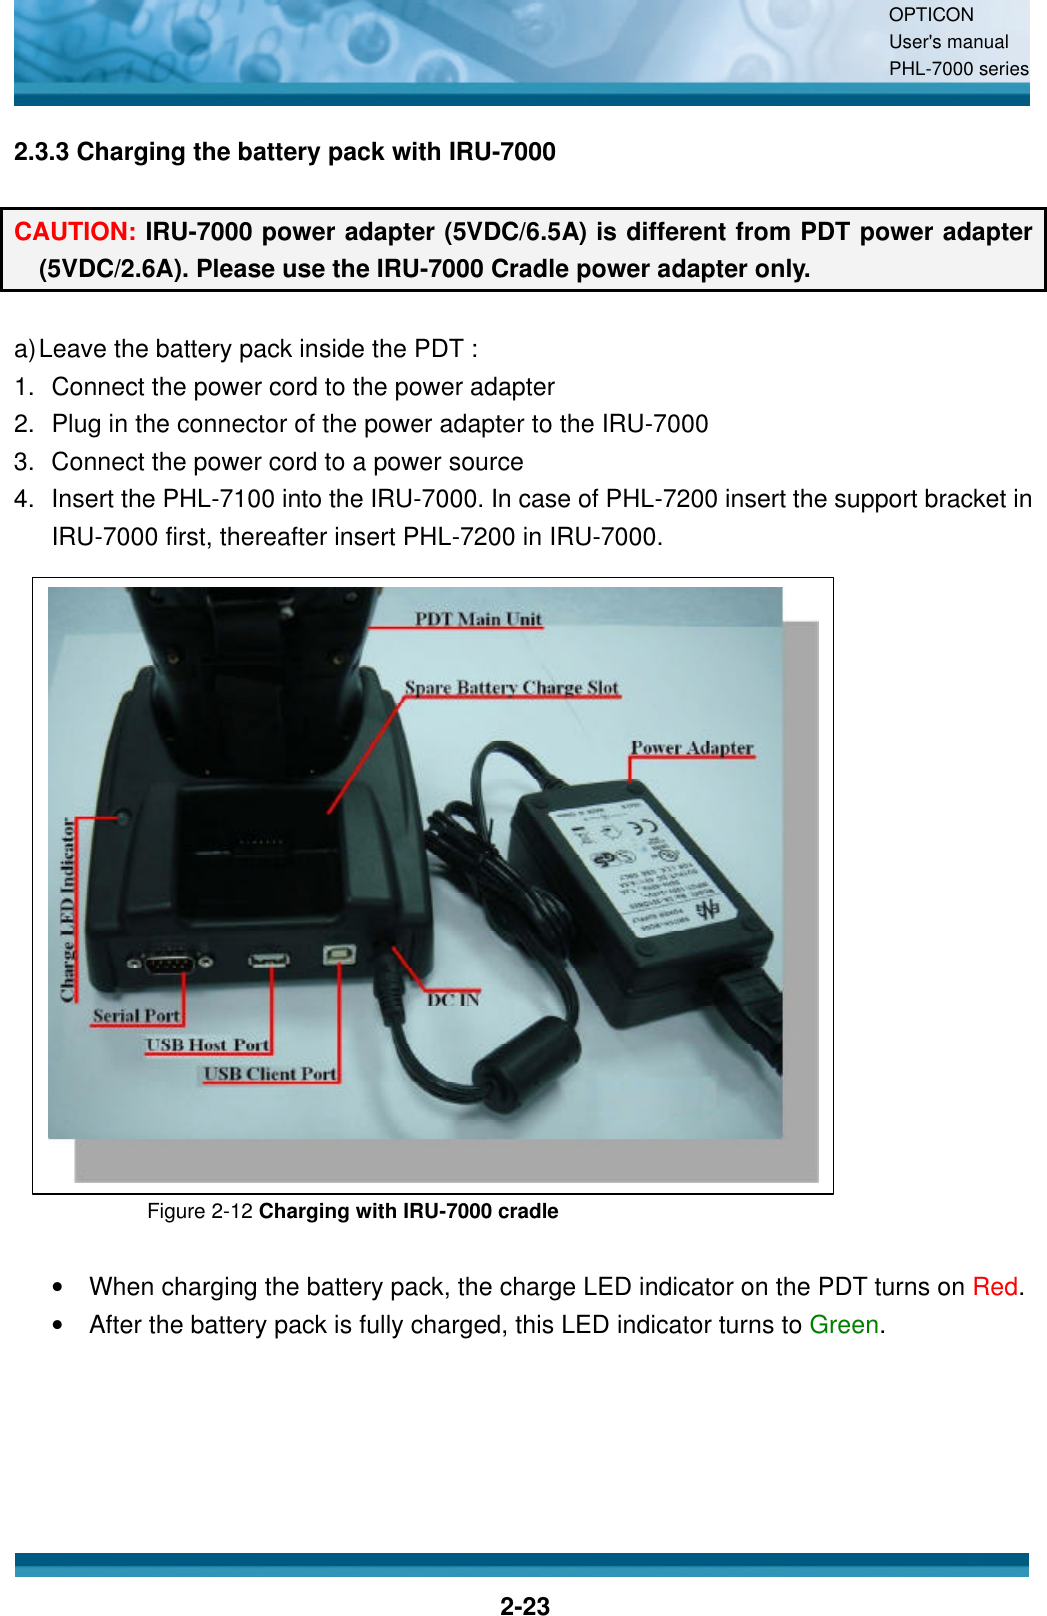 OPTICON User&apos;s manual PHL-7000 series    2-23 2.3.3 Charging the battery pack with IRU-7000  CAUTION: IRU-7000 power adapter (5VDC/6.5A) is different from PDT power adapter (5VDC/2.6A). Please use the IRU-7000 Cradle power adapter only.  a) Leave the battery pack inside the PDT : 1. Connect the power cord to the power adapter 2. Plug in the connector of the power adapter to the IRU-7000 3. Connect the power cord to a power source 4. Insert the PHL-7100 into the IRU-7000. In case of PHL-7200 insert the support bracket in IRU-7000 first, thereafter insert PHL-7200 in IRU-7000.                  Figure 2-12 Charging with IRU-7000 cradle  •  When charging the battery pack, the charge LED indicator on the PDT turns on Red.   •  After the battery pack is fully charged, this LED indicator turns to Green.  